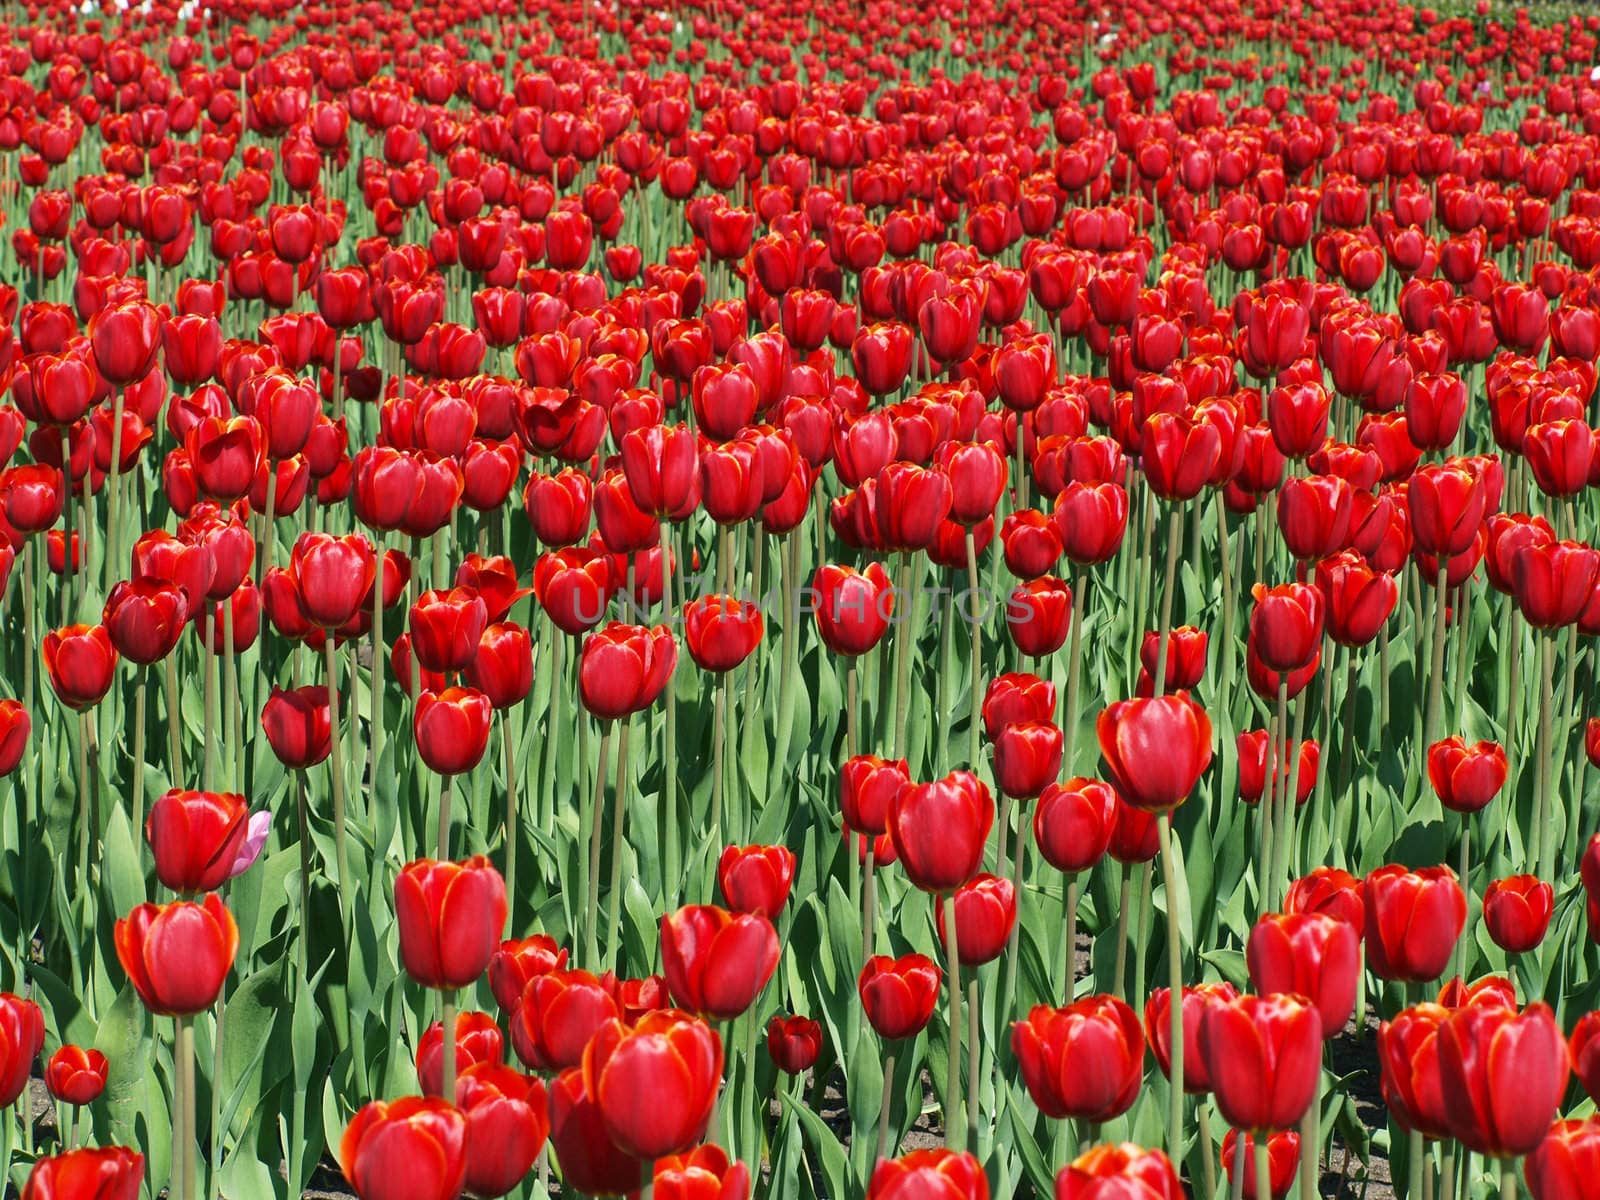 Endless field of red tulips